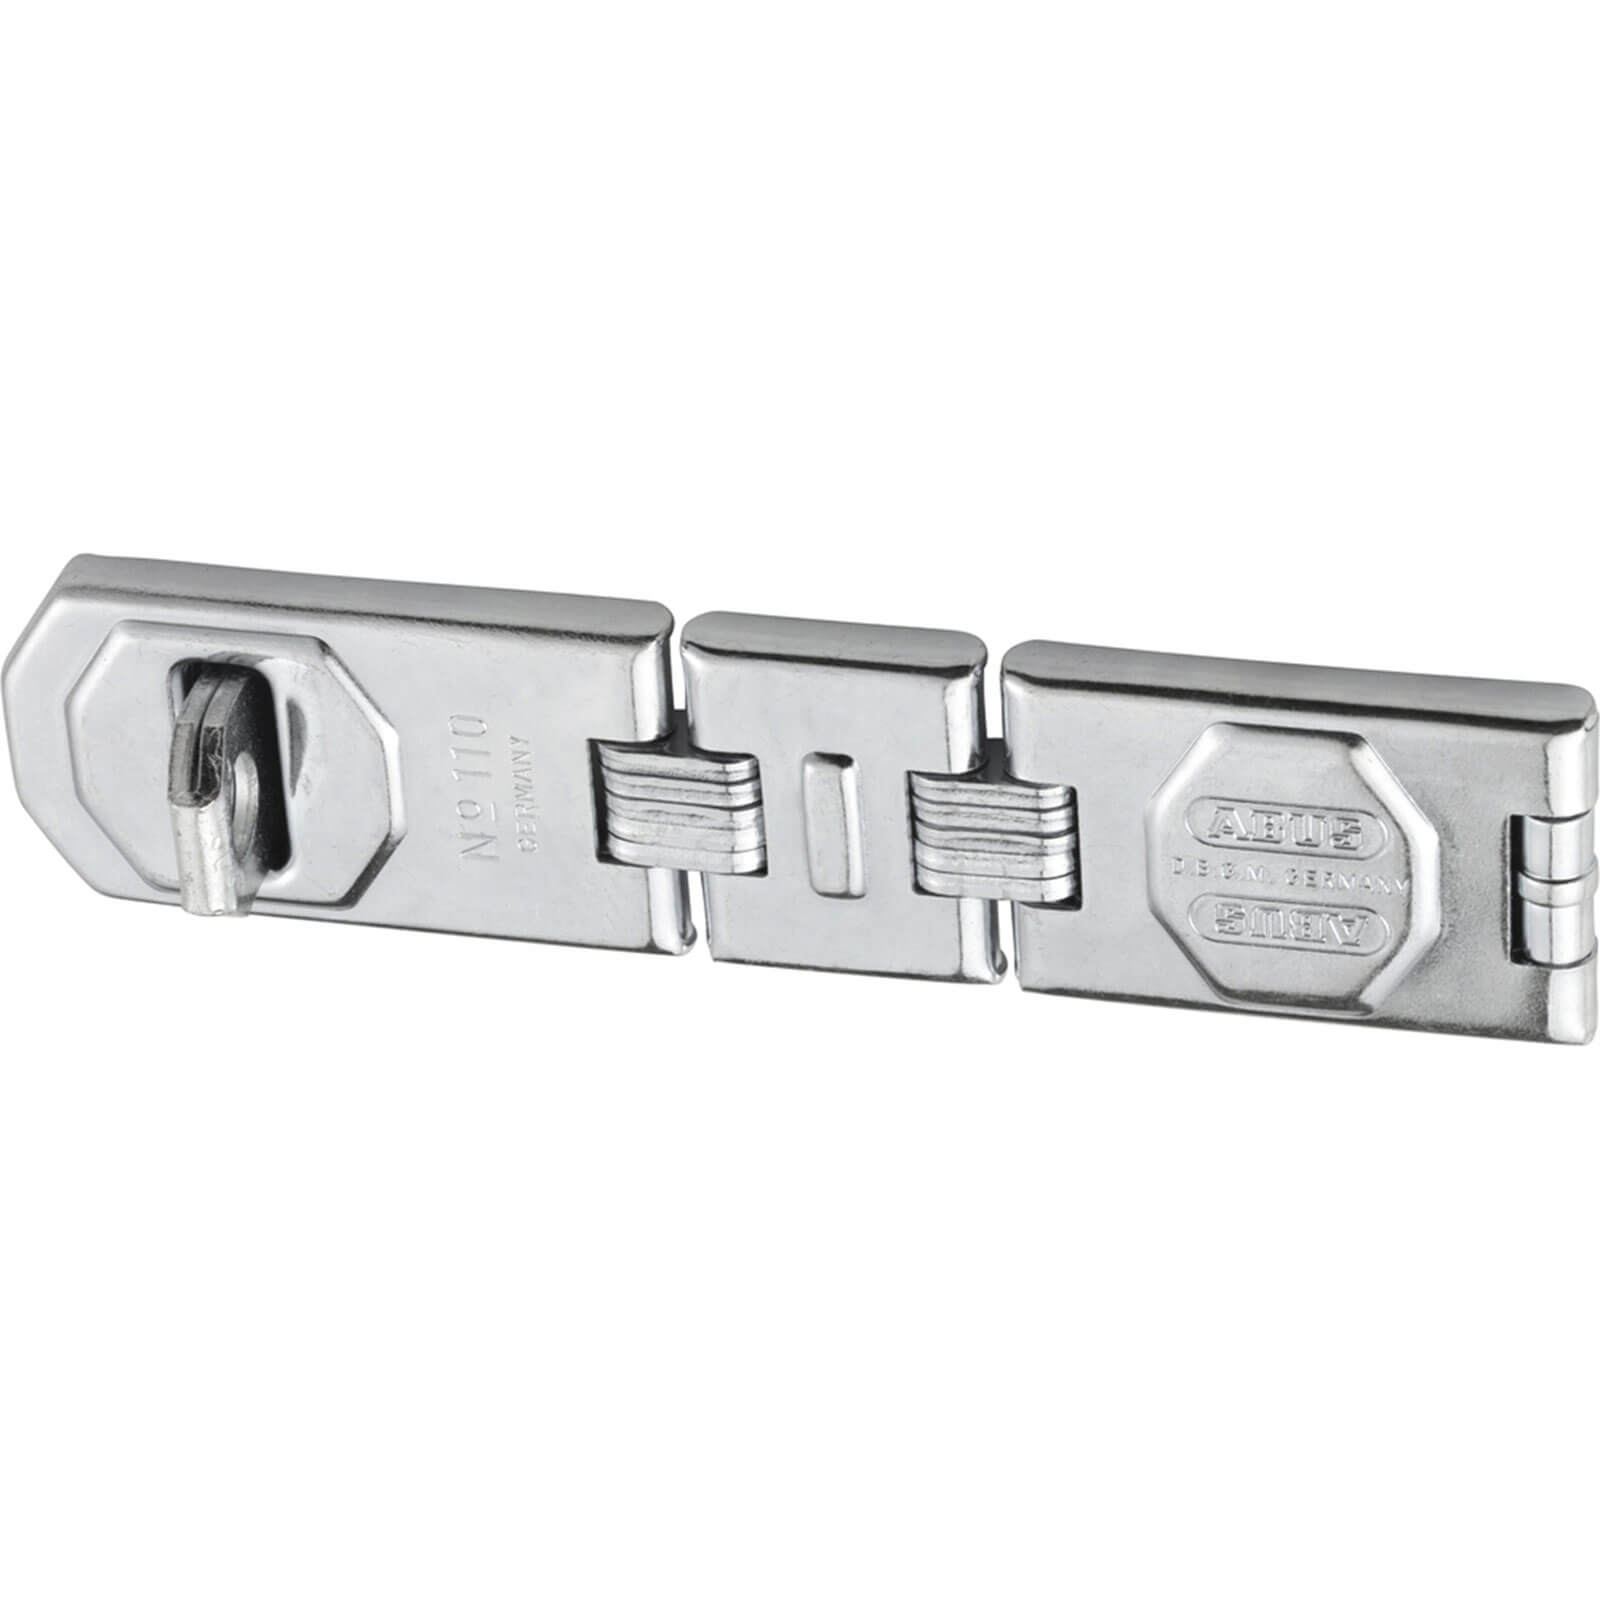 Image of Abus 110 Series Universal Hasp & Staple 195mm Double Jointed